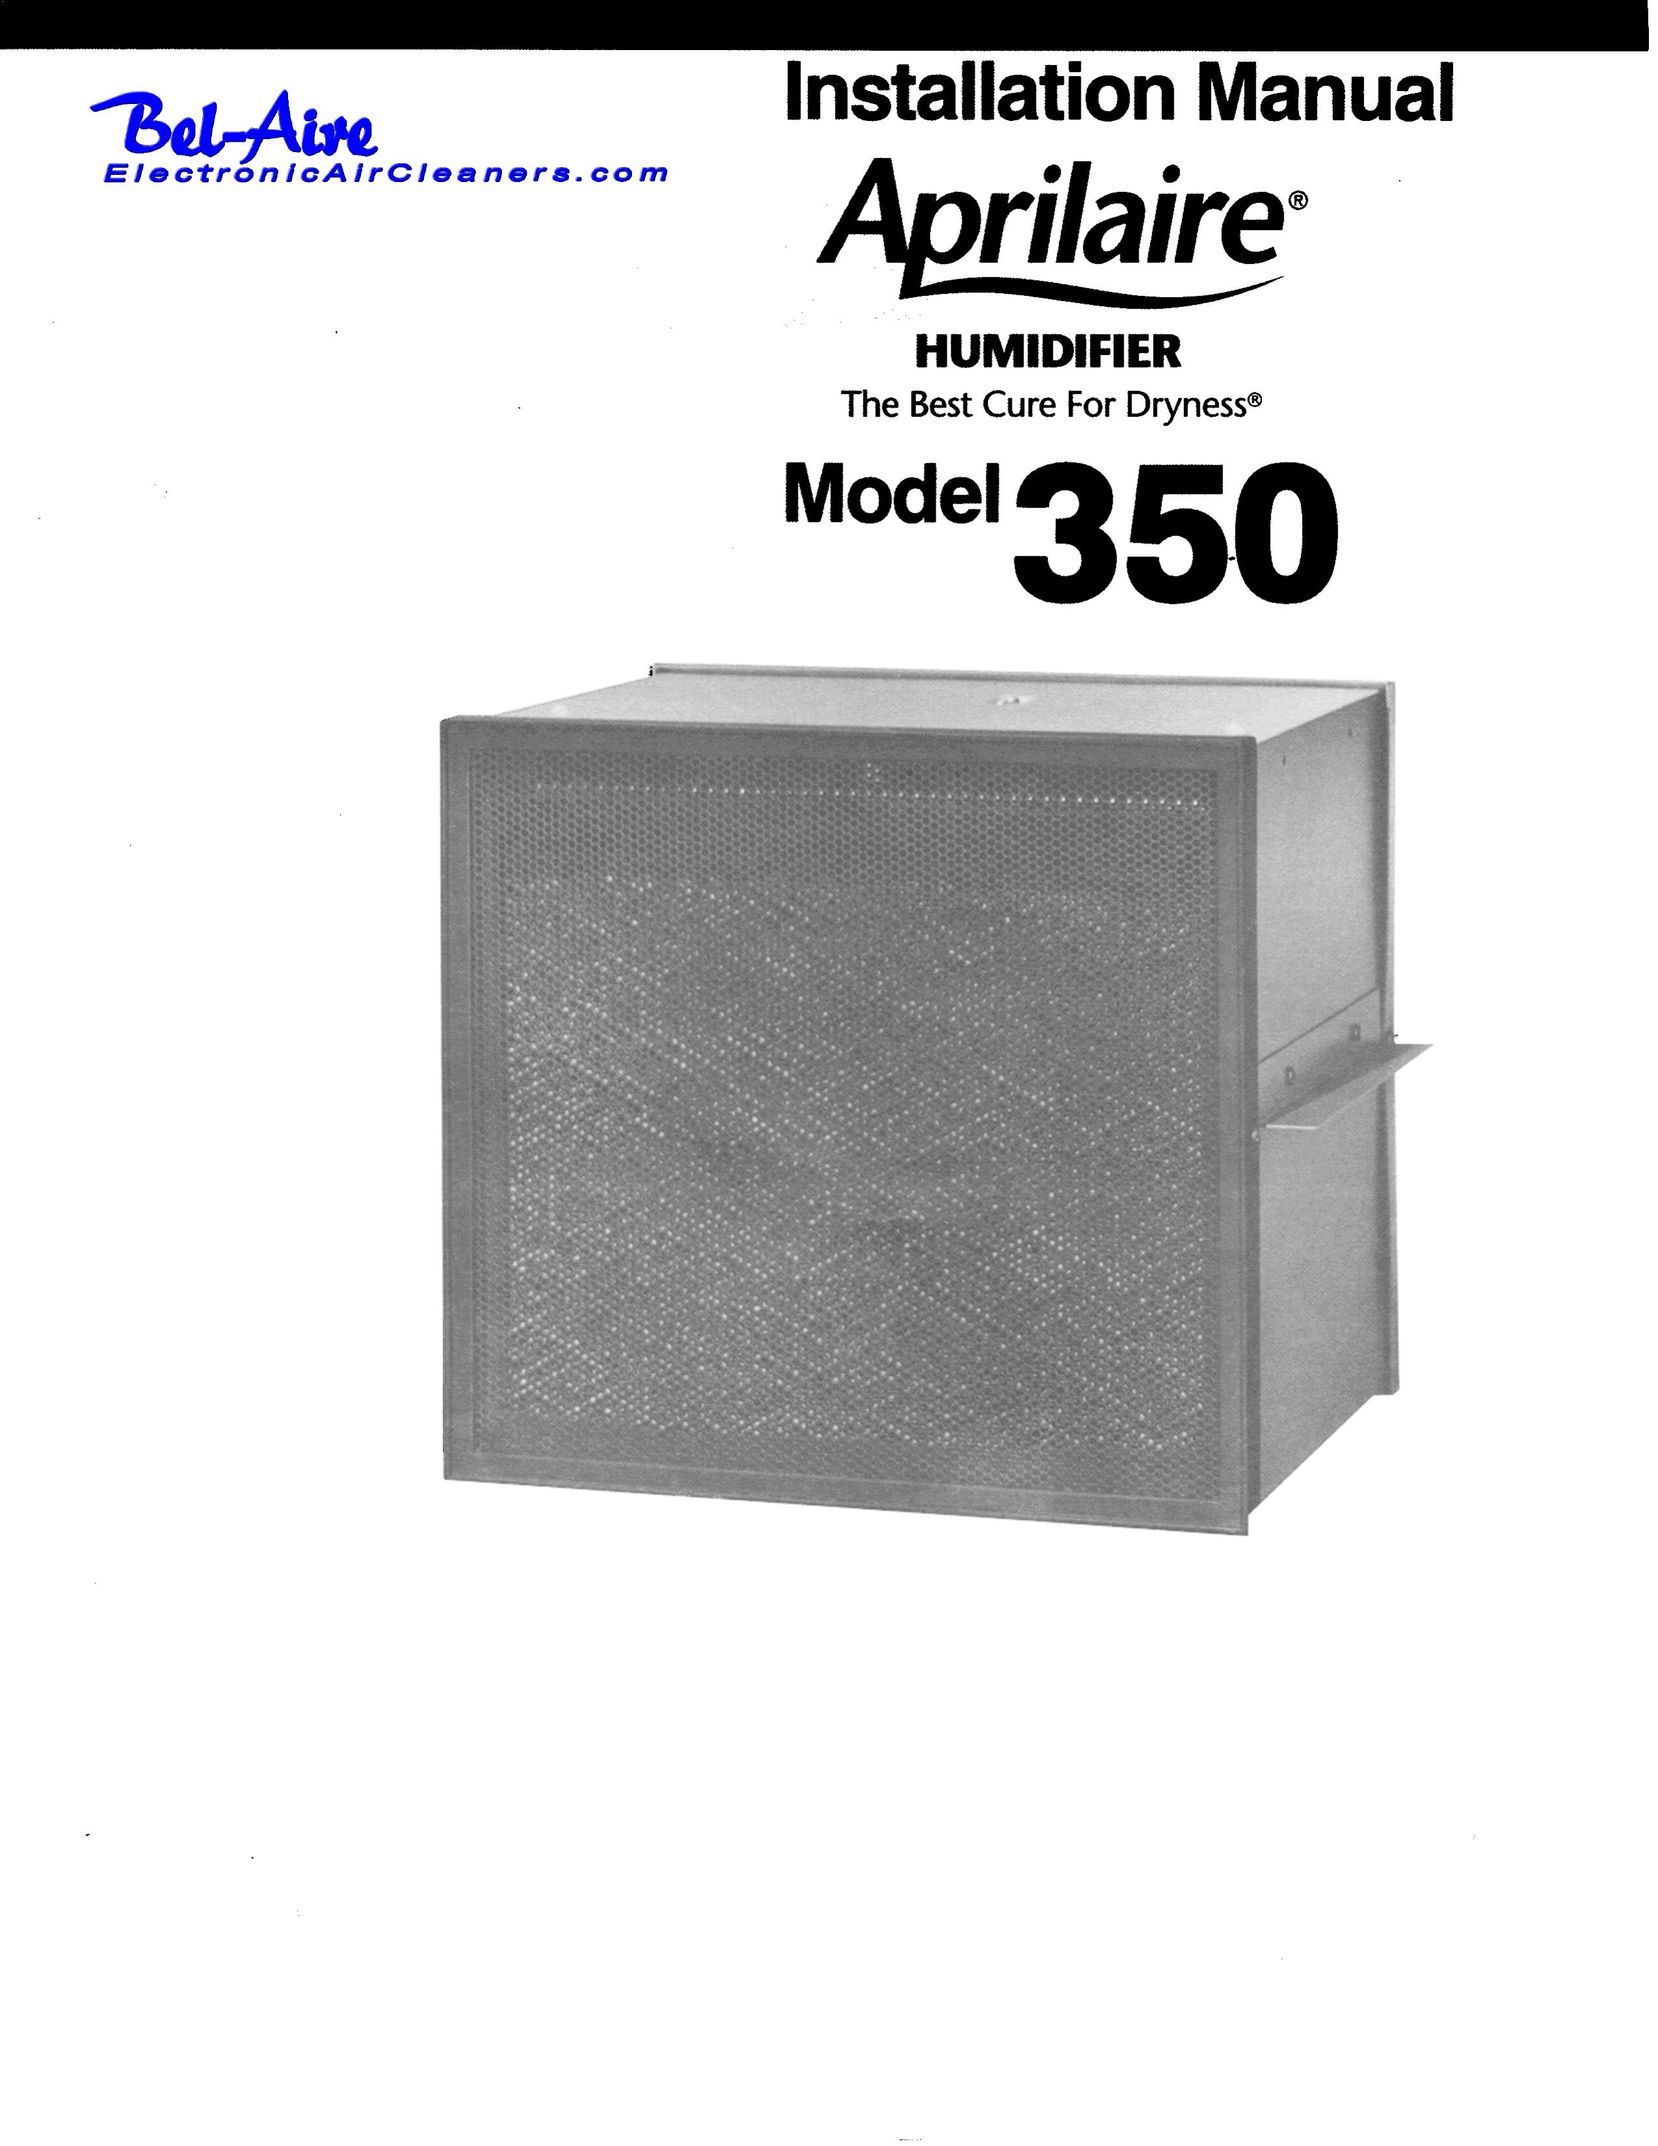 Aprilaire 350 Humidifier User Manual